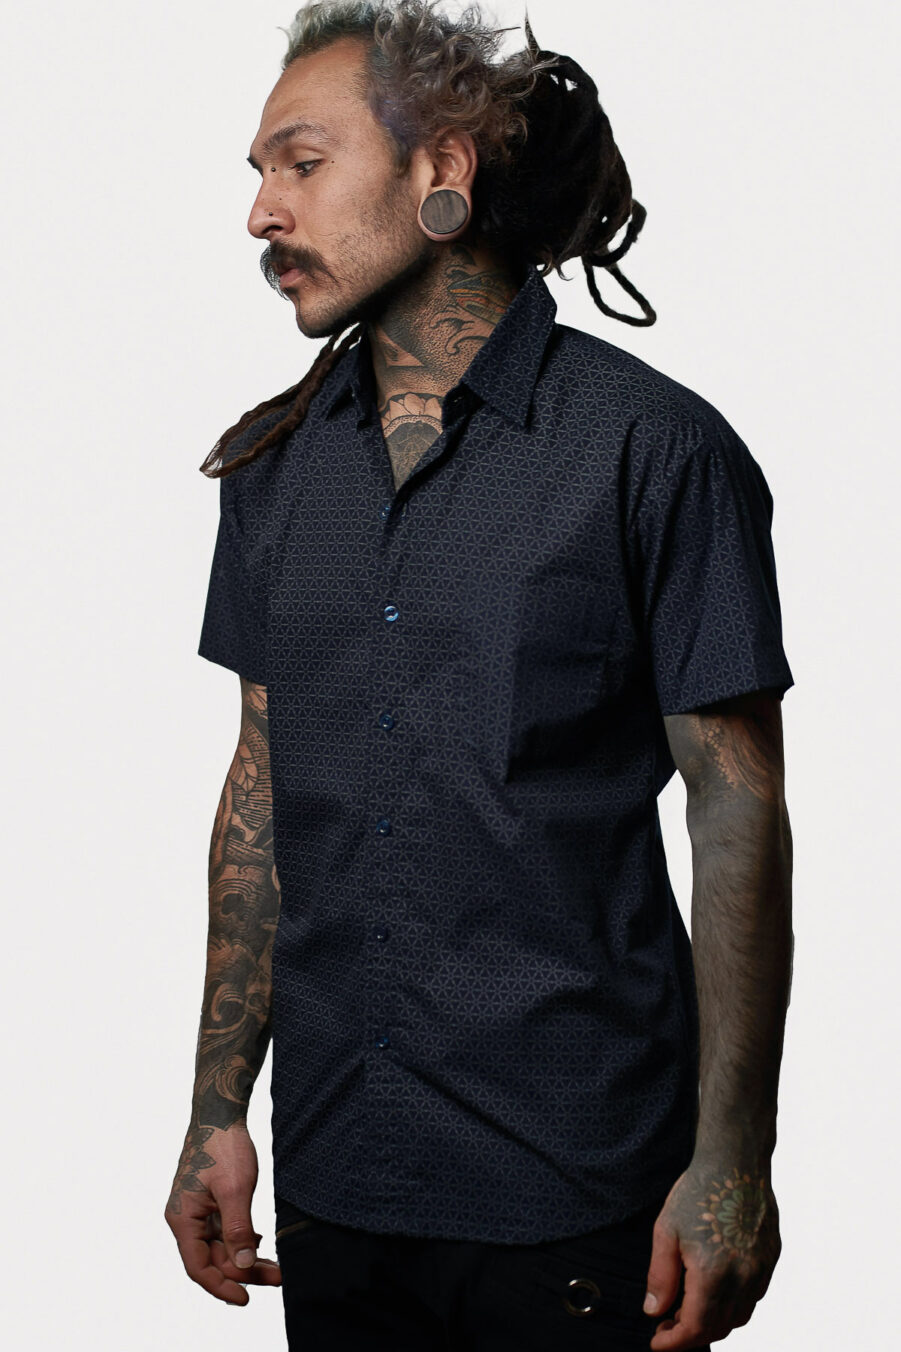 The Flower of Life dark blue button-up shirt for men, featured in Avanyah's online shop, stands out with its unique screen-printed pattern. A fusion of alternative fashion and festival outfits, it's a wearable art piece for the discerning gentleman.